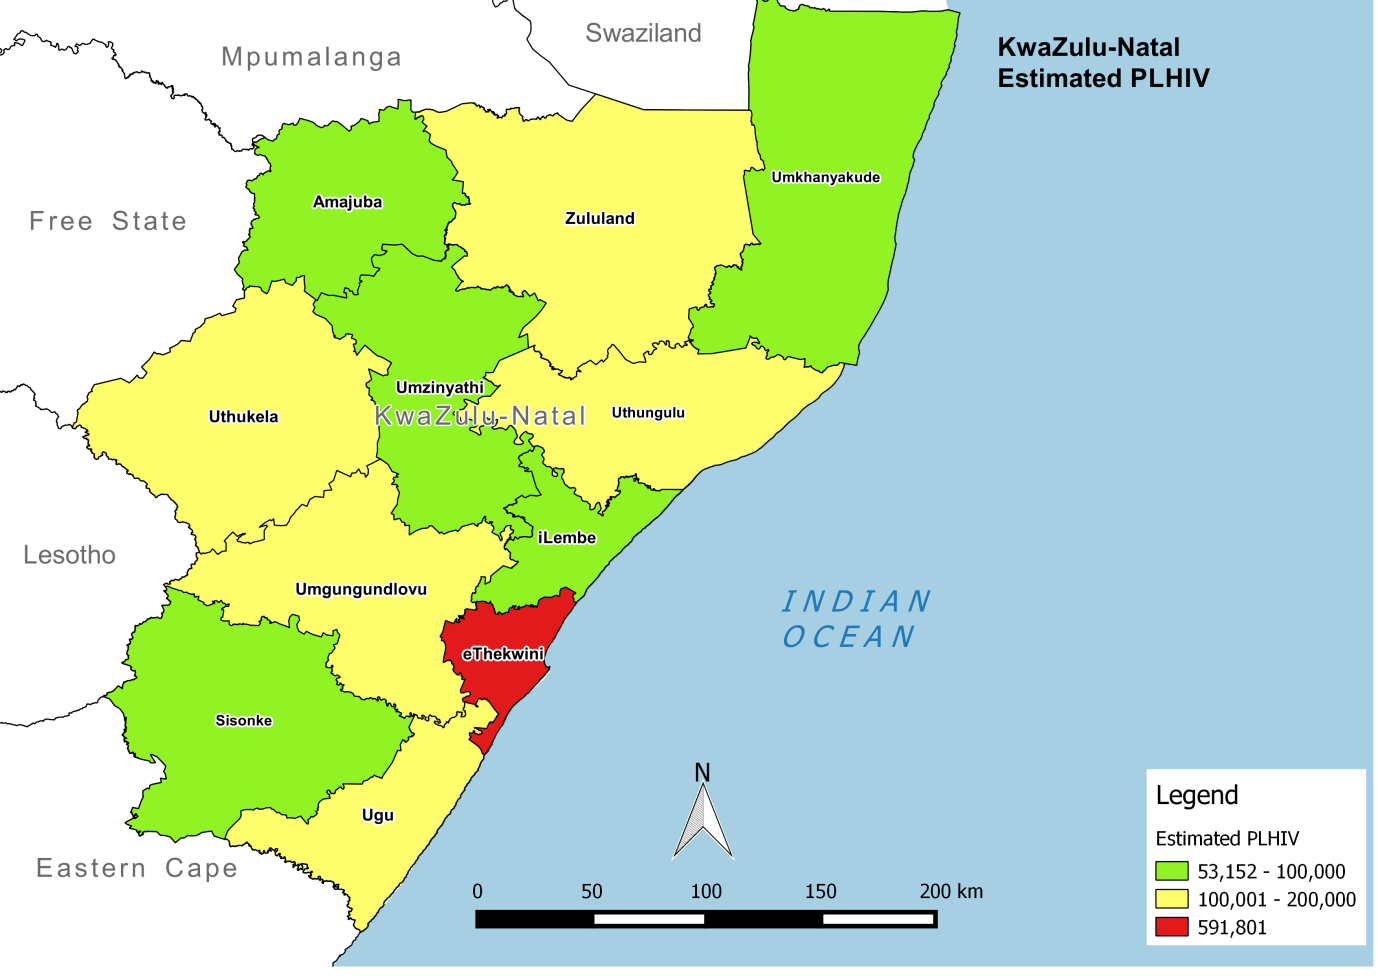 a greater number of PLHIV live in eThekiwini than in other districts